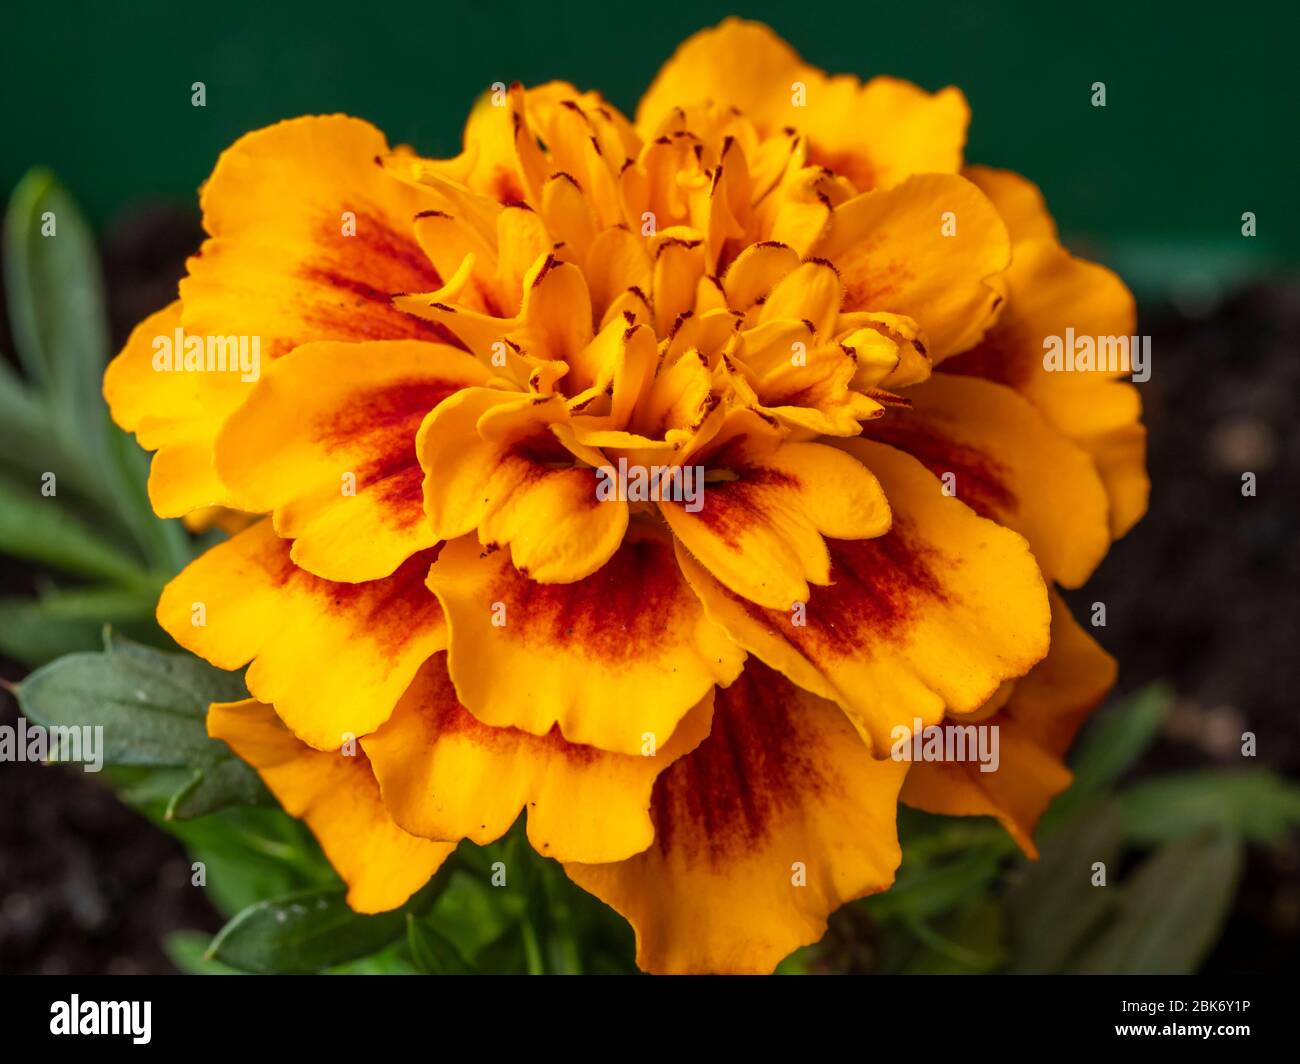 Closeup of a bright orange and yellow French marigold flower, Tagetes patula Stock Photo